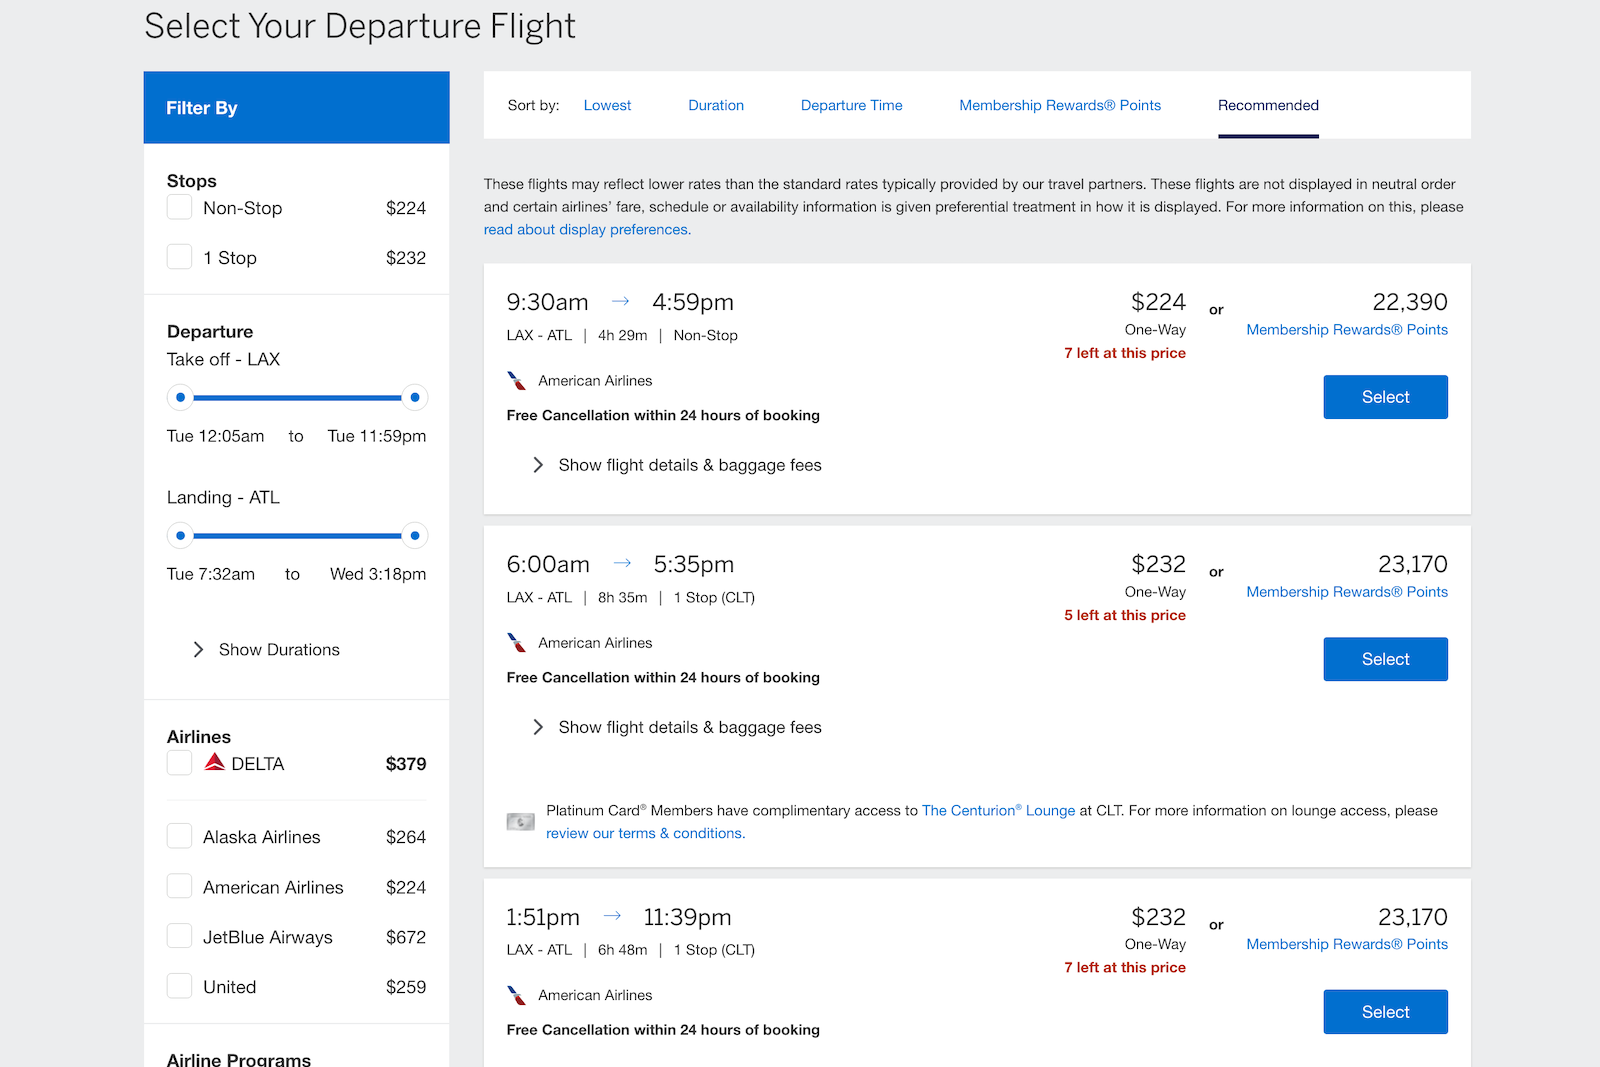 flight search results page from Amex Travel showing options for filters